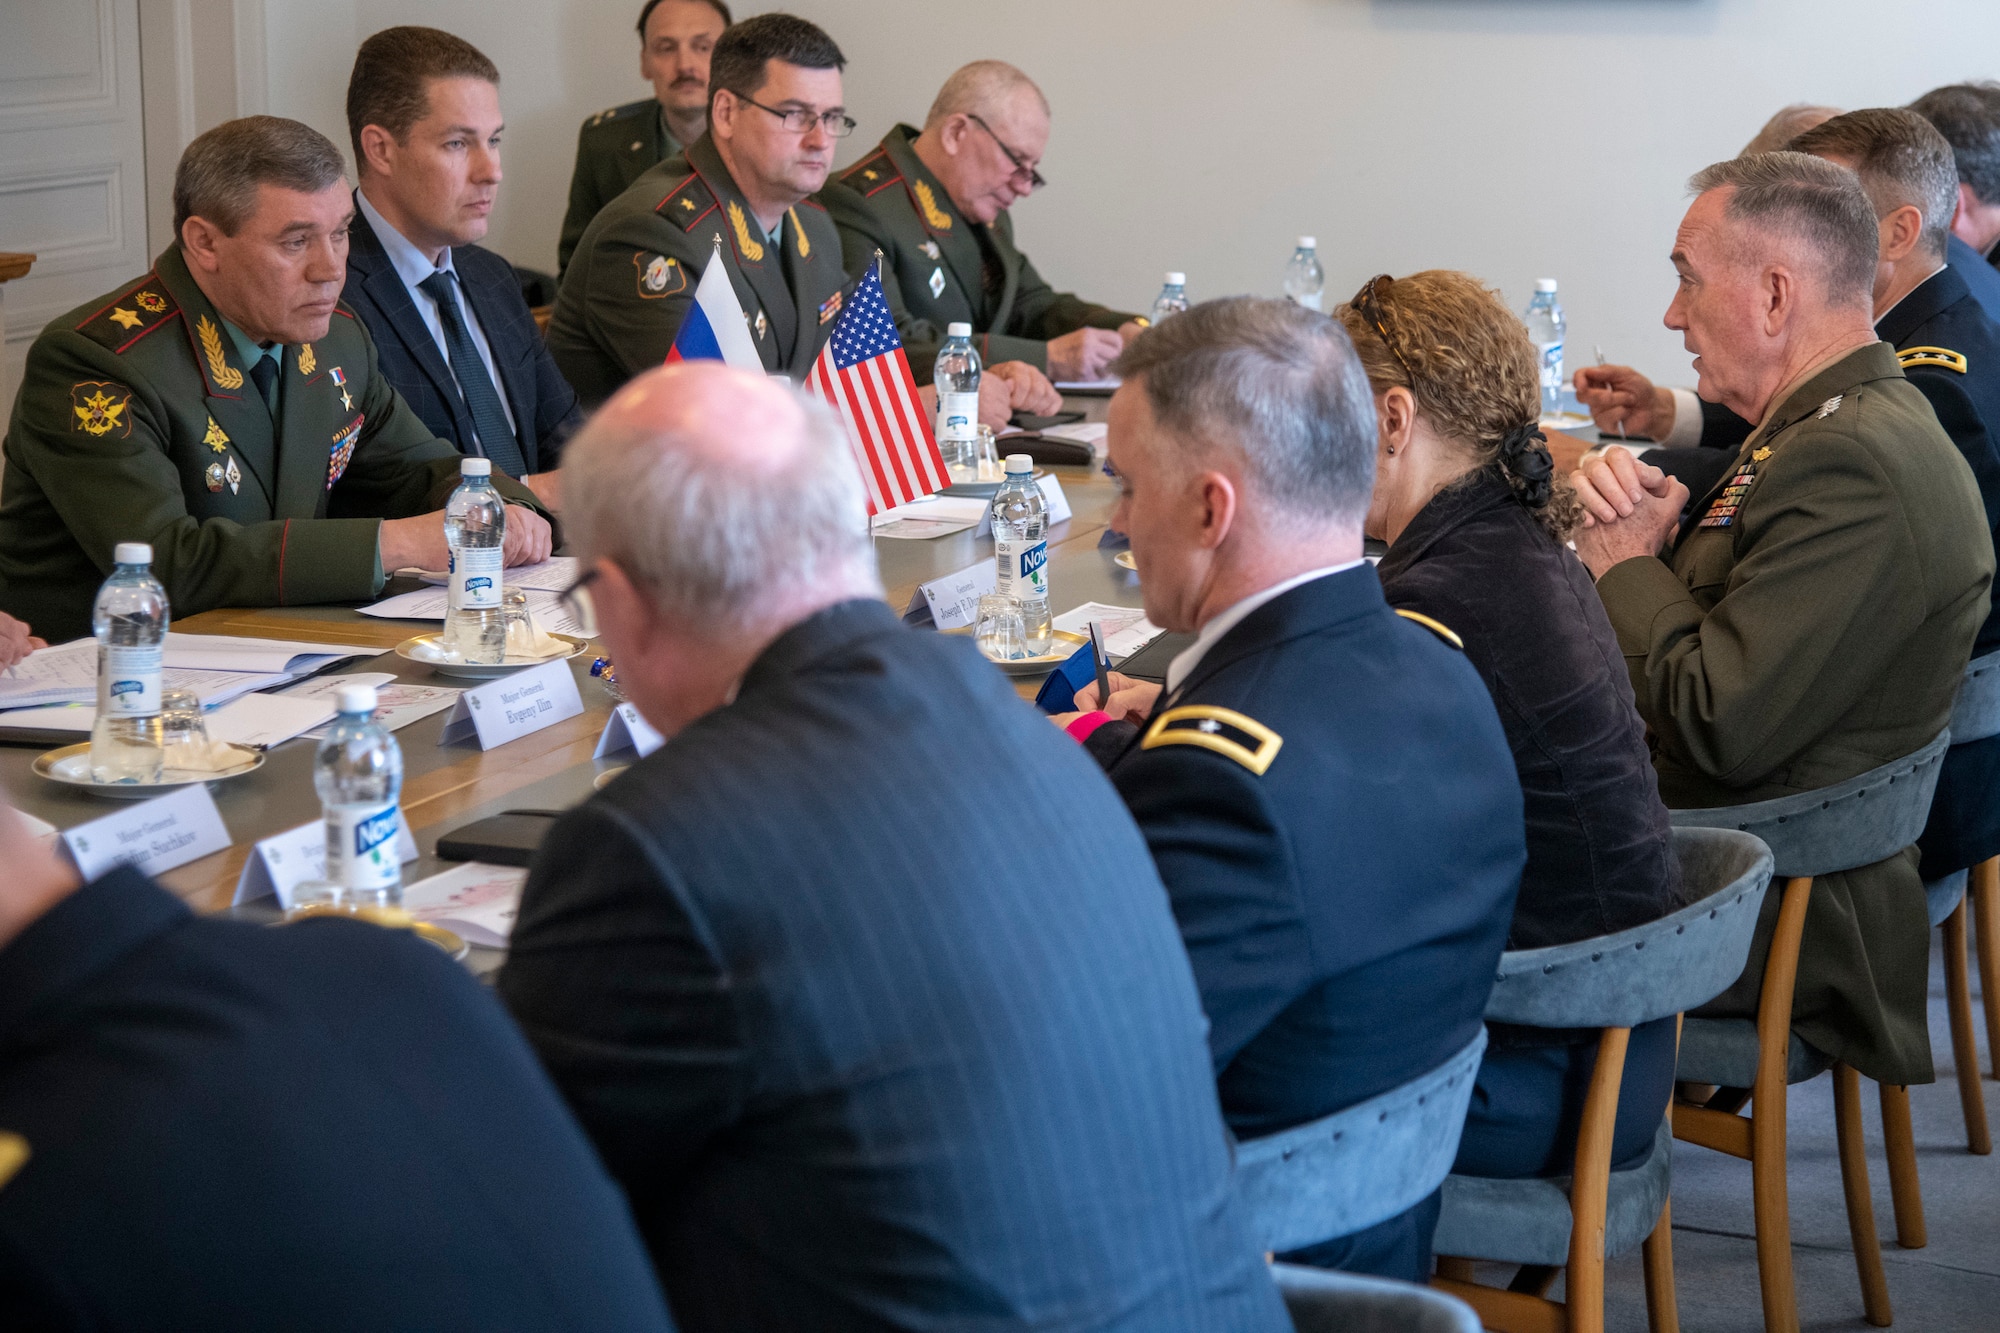 Marine Corps Gen. Joe Dunford, chairman of the Joint Chiefs of Staff, meets with Russian Army Gen. Valery Gerasimov, Chief of the General Staff of the Armed Forces of Russia, at Königstedt Manor in Helsinki, Finland, June 8, 2018.